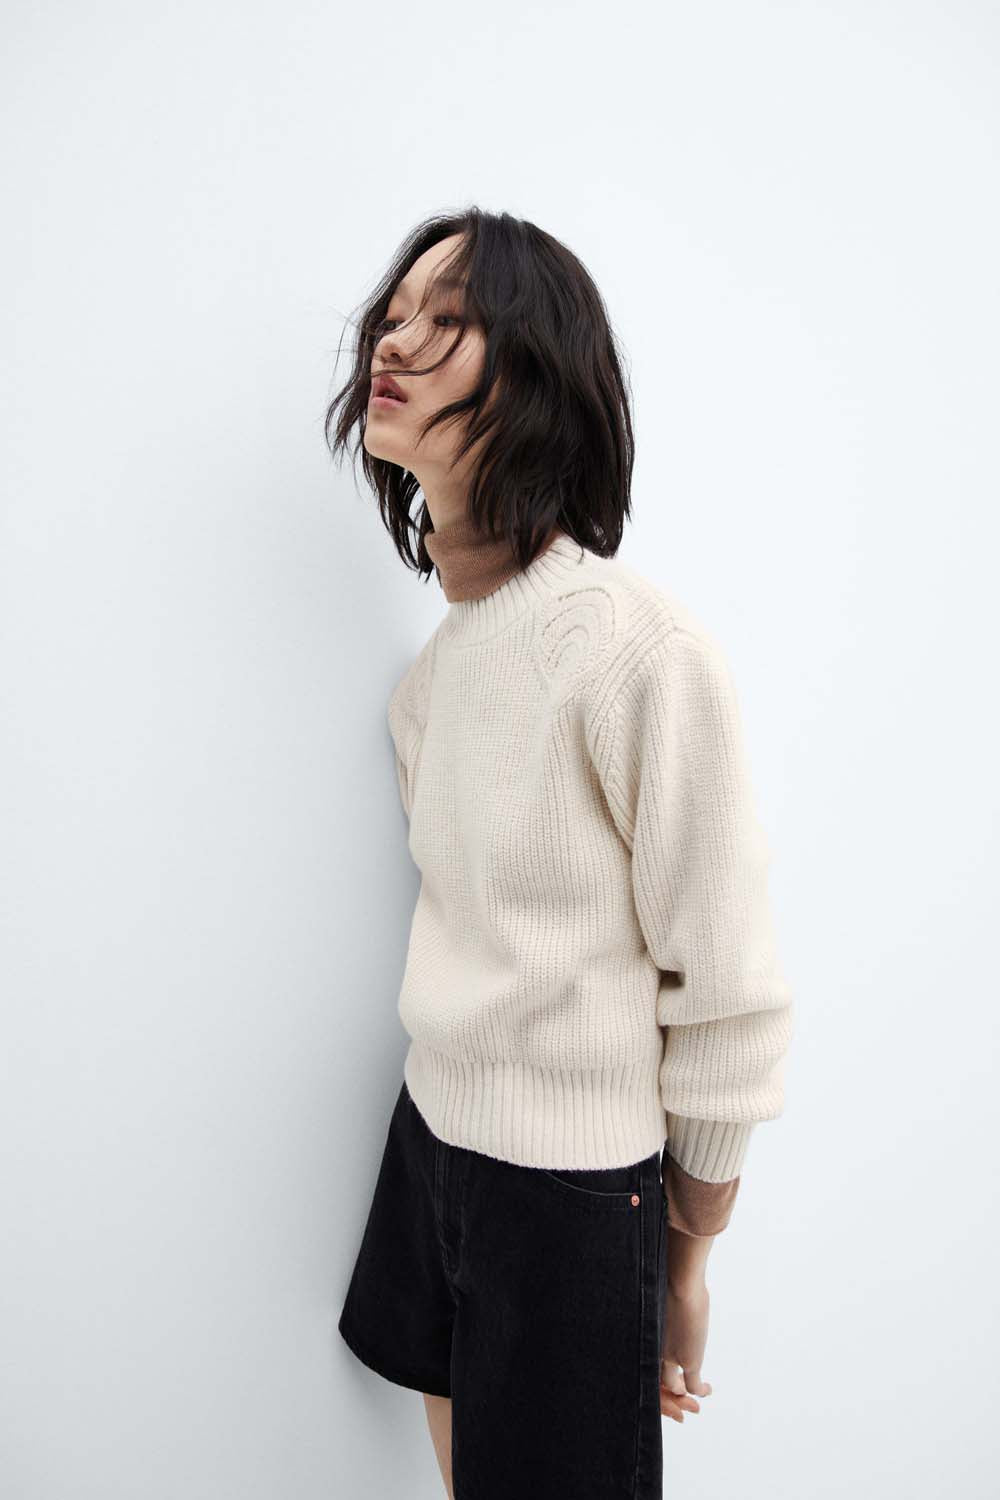 Mango Perkins neck sweater with shoulder detail 6 Shaws Department Stores